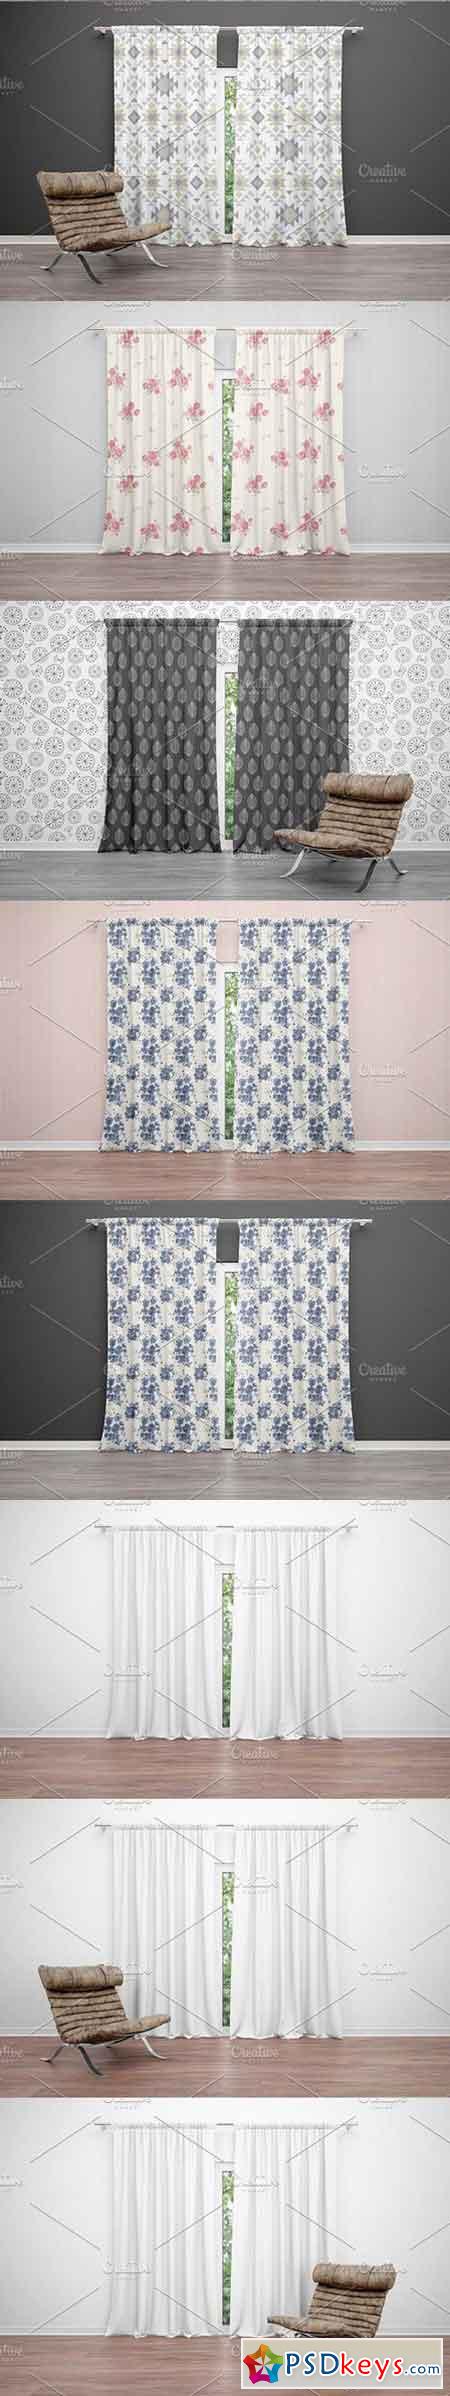 Download Curtains Mockup 1656268 » Free Download Photoshop Vector Stock image Via Torrent Zippyshare From ...